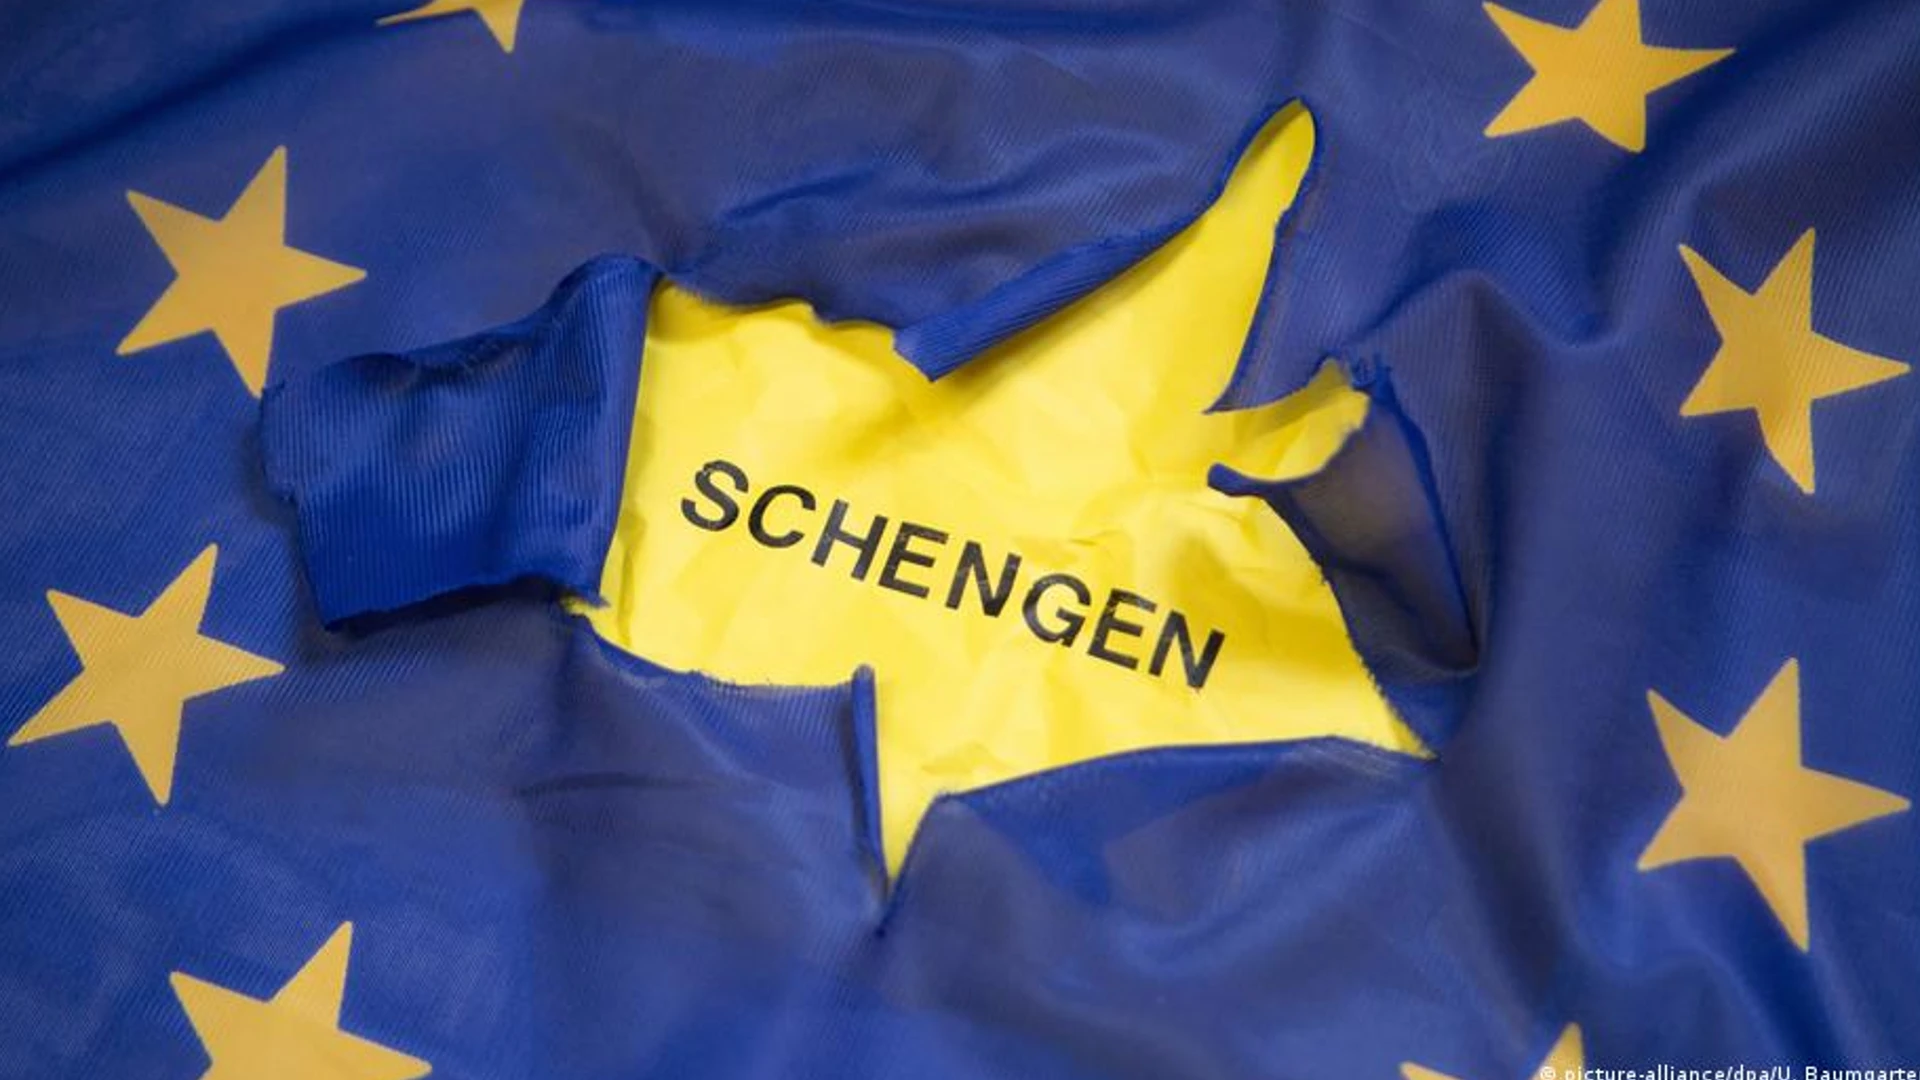 Planning A Holiday To Europe? Here Are The Fastest Ways To Get A Schengen Visa